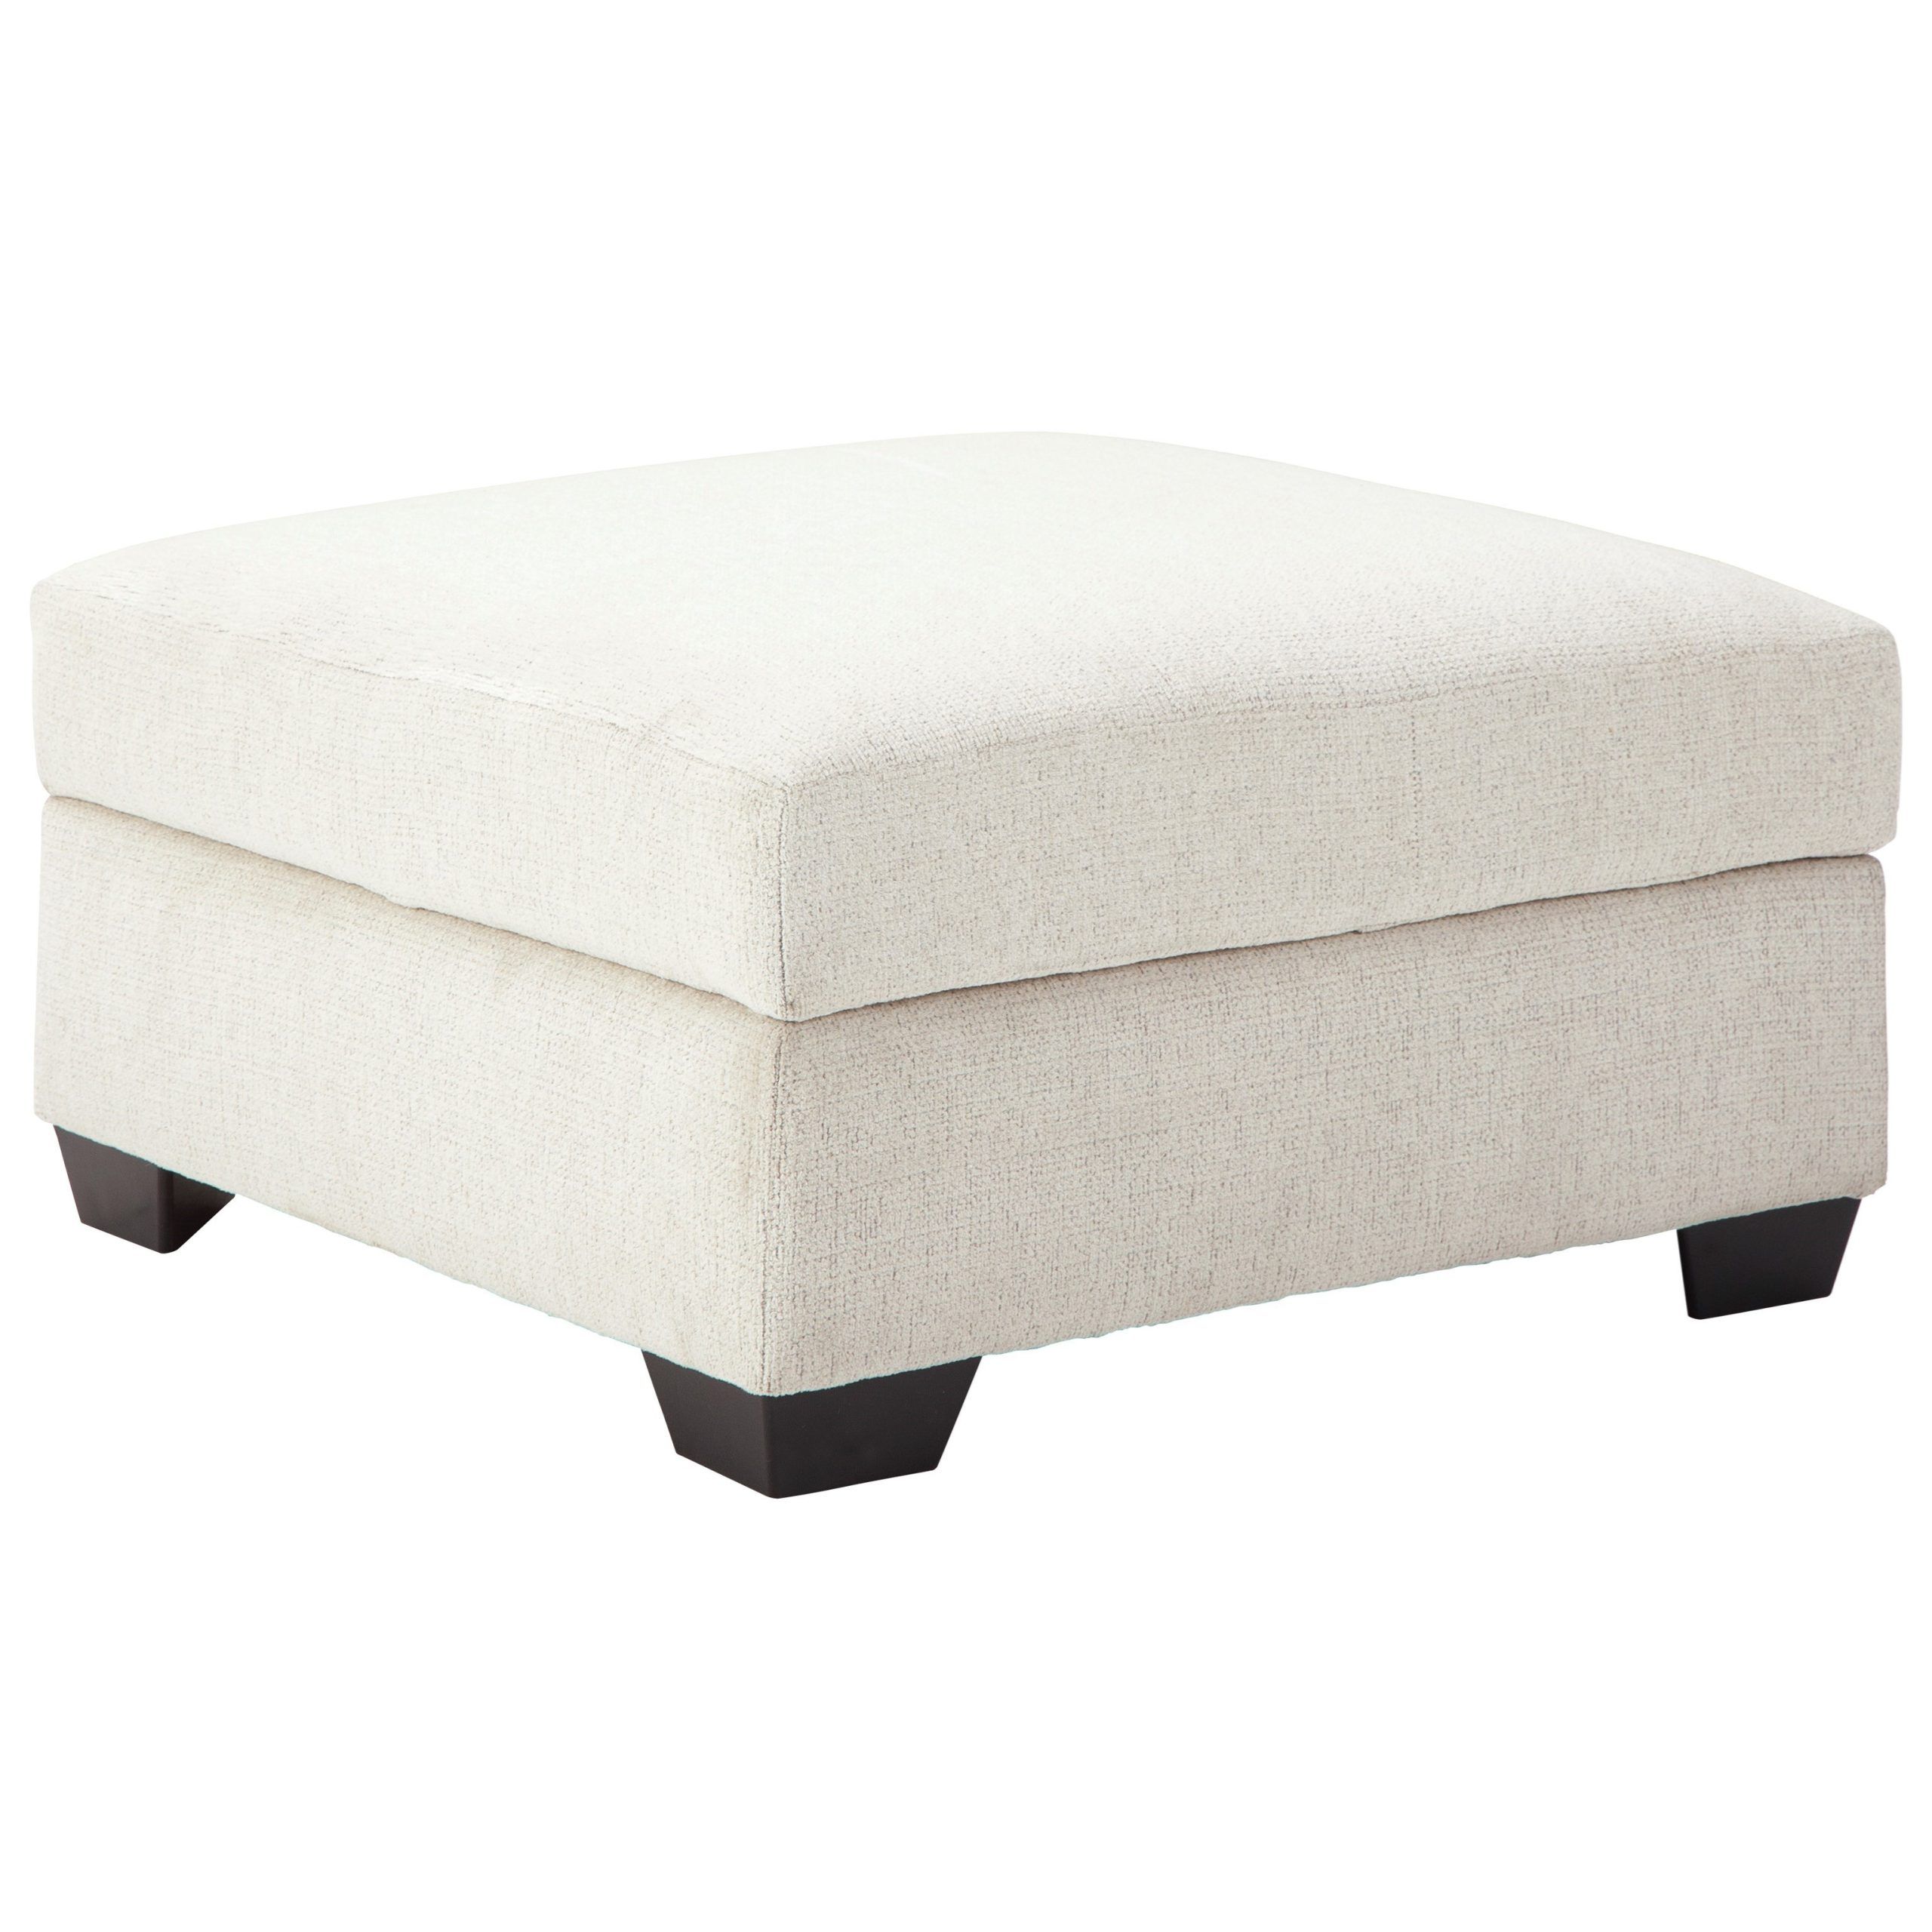 Ashley Furniture Cambri Ottoman With Storage/reversible Tray Top With Cup  Holders | Godby Home Furnishings | Ottomans Throughout Ottomans With Stool And Reversible Tray (View 7 of 15)